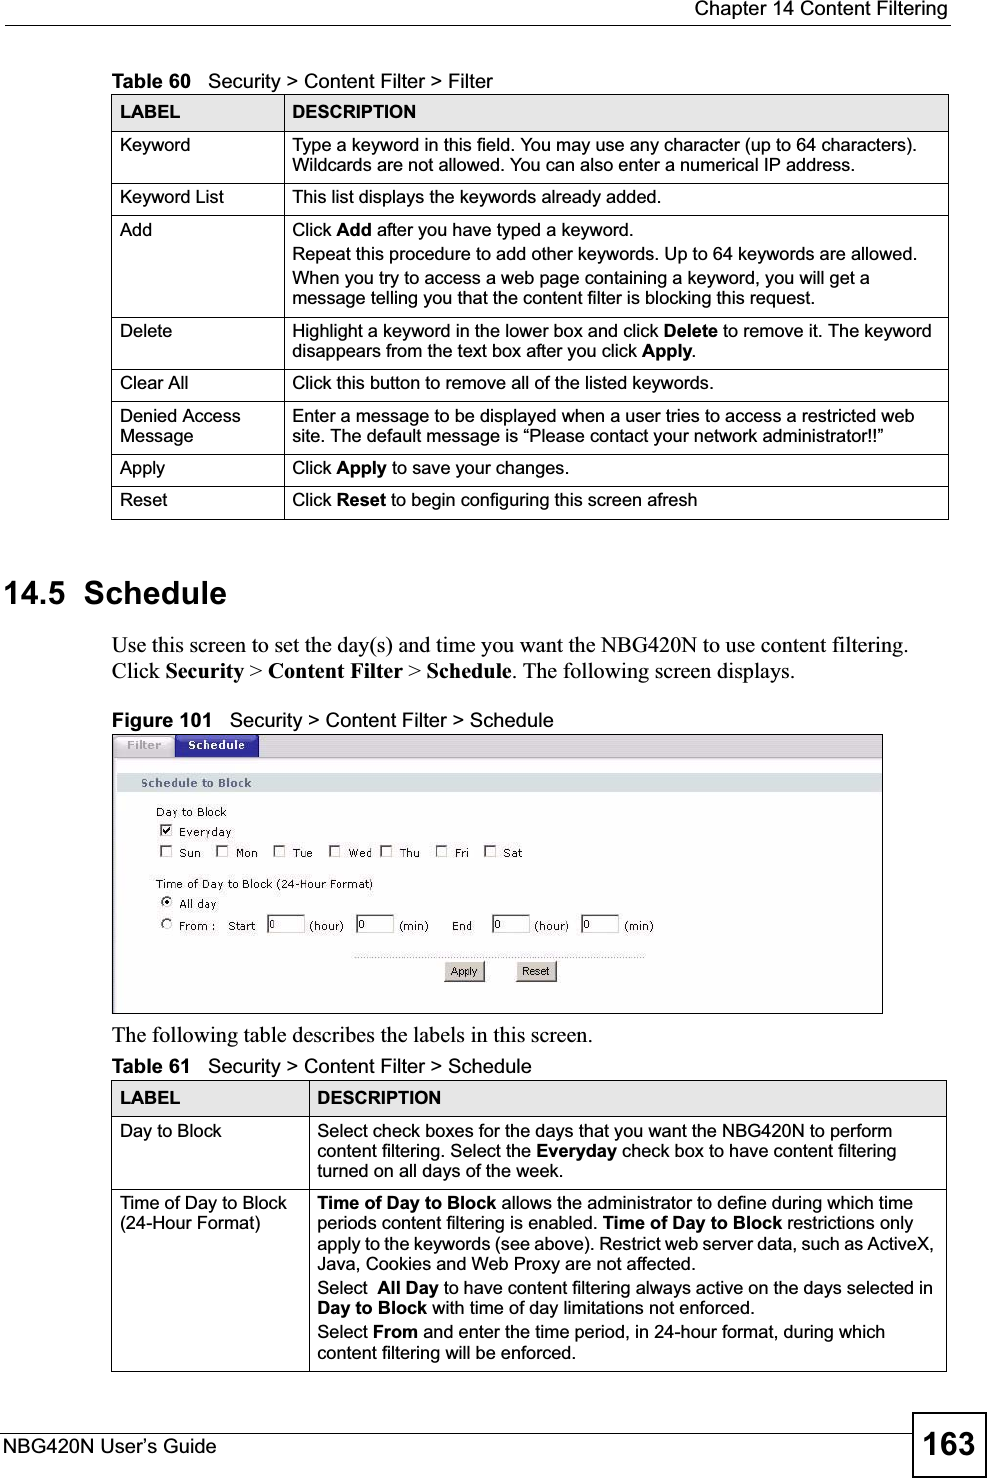  Chapter 14 Content FilteringNBG420N User’s Guide 16314.5  ScheduleUse this screen to set the day(s) and time you want the NBG420N to use content filtering. Click Security &gt; Content Filter &gt; Schedule. The following screen displays.Figure 101   Security &gt; Content Filter &gt; ScheduleThe following table describes the labels in this screen.Keyword Type a keyword in this field. You may use any character (up to 64 characters). Wildcards are not allowed. You can also enter a numerical IP address.Keyword List This list displays the keywords already added. Add  Click Add after you have typed a keyword. Repeat this procedure to add other keywords. Up to 64 keywords are allowed.When you try to access a web page containing a keyword, you will get a message telling you that the content filter is blocking this request.Delete Highlight a keyword in the lower box and click Delete to remove it. The keyword disappears from the text box after you click Apply.Clear All Click this button to remove all of the listed keywords.Denied Access MessageEnter a message to be displayed when a user tries to access a restricted web site. The default message is “Please contact your network administrator!!”Apply Click Apply to save your changes.Reset Click Reset to begin configuring this screen afreshTable 60   Security &gt; Content Filter &gt; FilterLABEL DESCRIPTIONTable 61   Security &gt; Content Filter &gt; ScheduleLABEL DESCRIPTIONDay to Block Select check boxes for the days that you want the NBG420N to perform content filtering. Select the Everyday check box to have content filtering turned on all days of the week.Time of Day to Block (24-Hour Format)Time of Day to Block allows the administrator to define during which time periods content filtering is enabled. Time of Day to Block restrictions only apply to the keywords (see above). Restrict web server data, such as ActiveX, Java, Cookies and Web Proxy are not affected.Select All Day to have content filtering always active on the days selected in Day to Block with time of day limitations not enforced.Select From and enter the time period, in 24-hour format, during which content filtering will be enforced. 